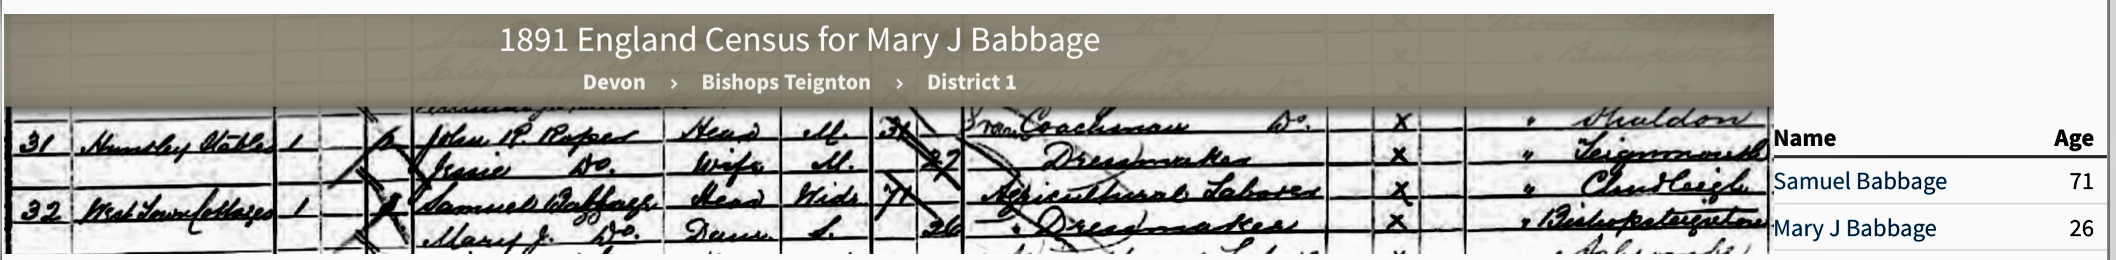 1891 Census for Mary Jane Babbage